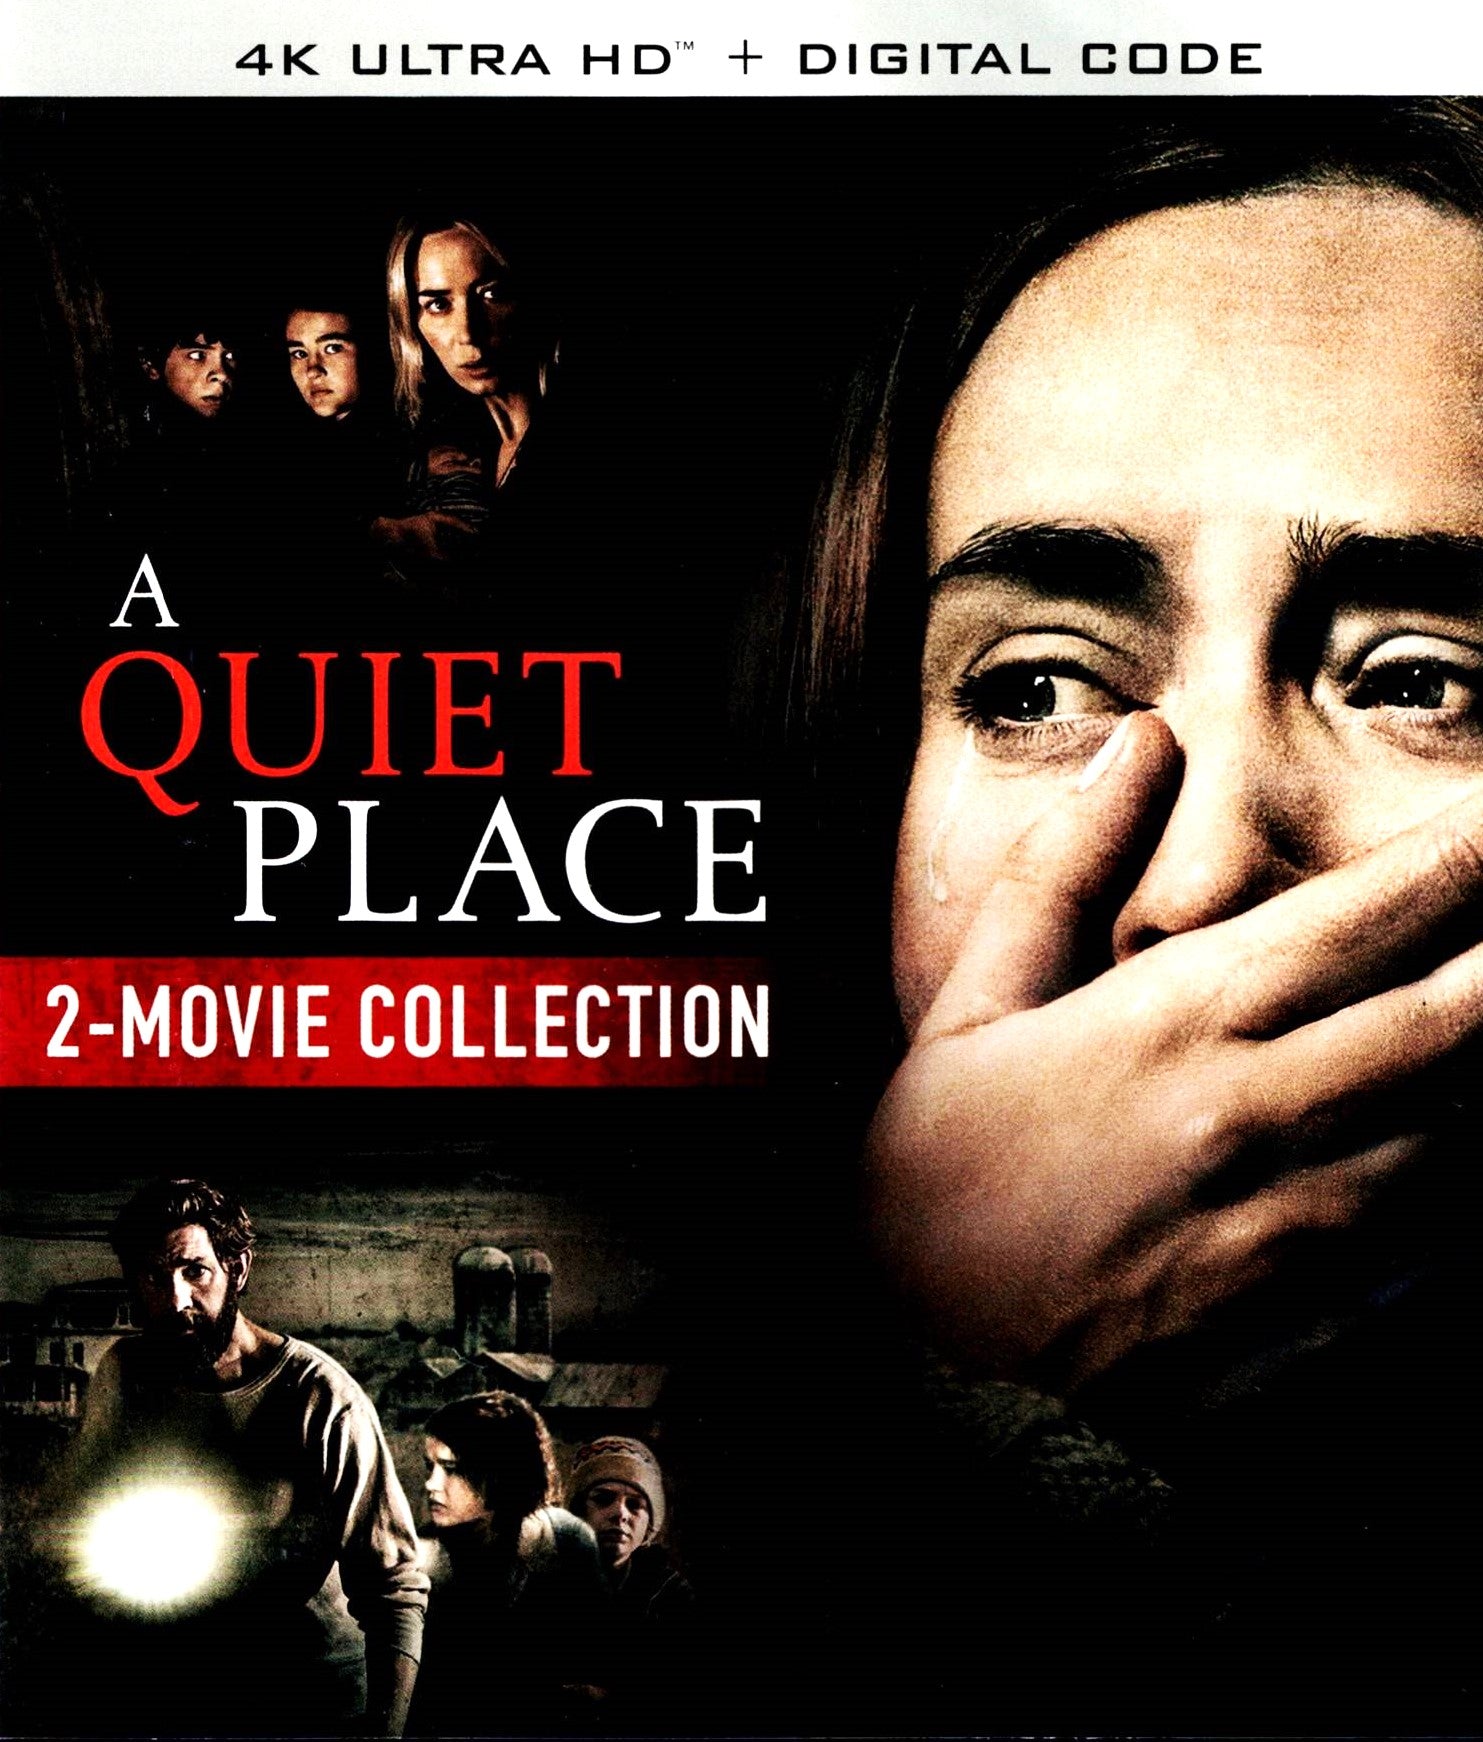 A QUIET PLACE 2-MOVIE COLLECTION 4K UHD